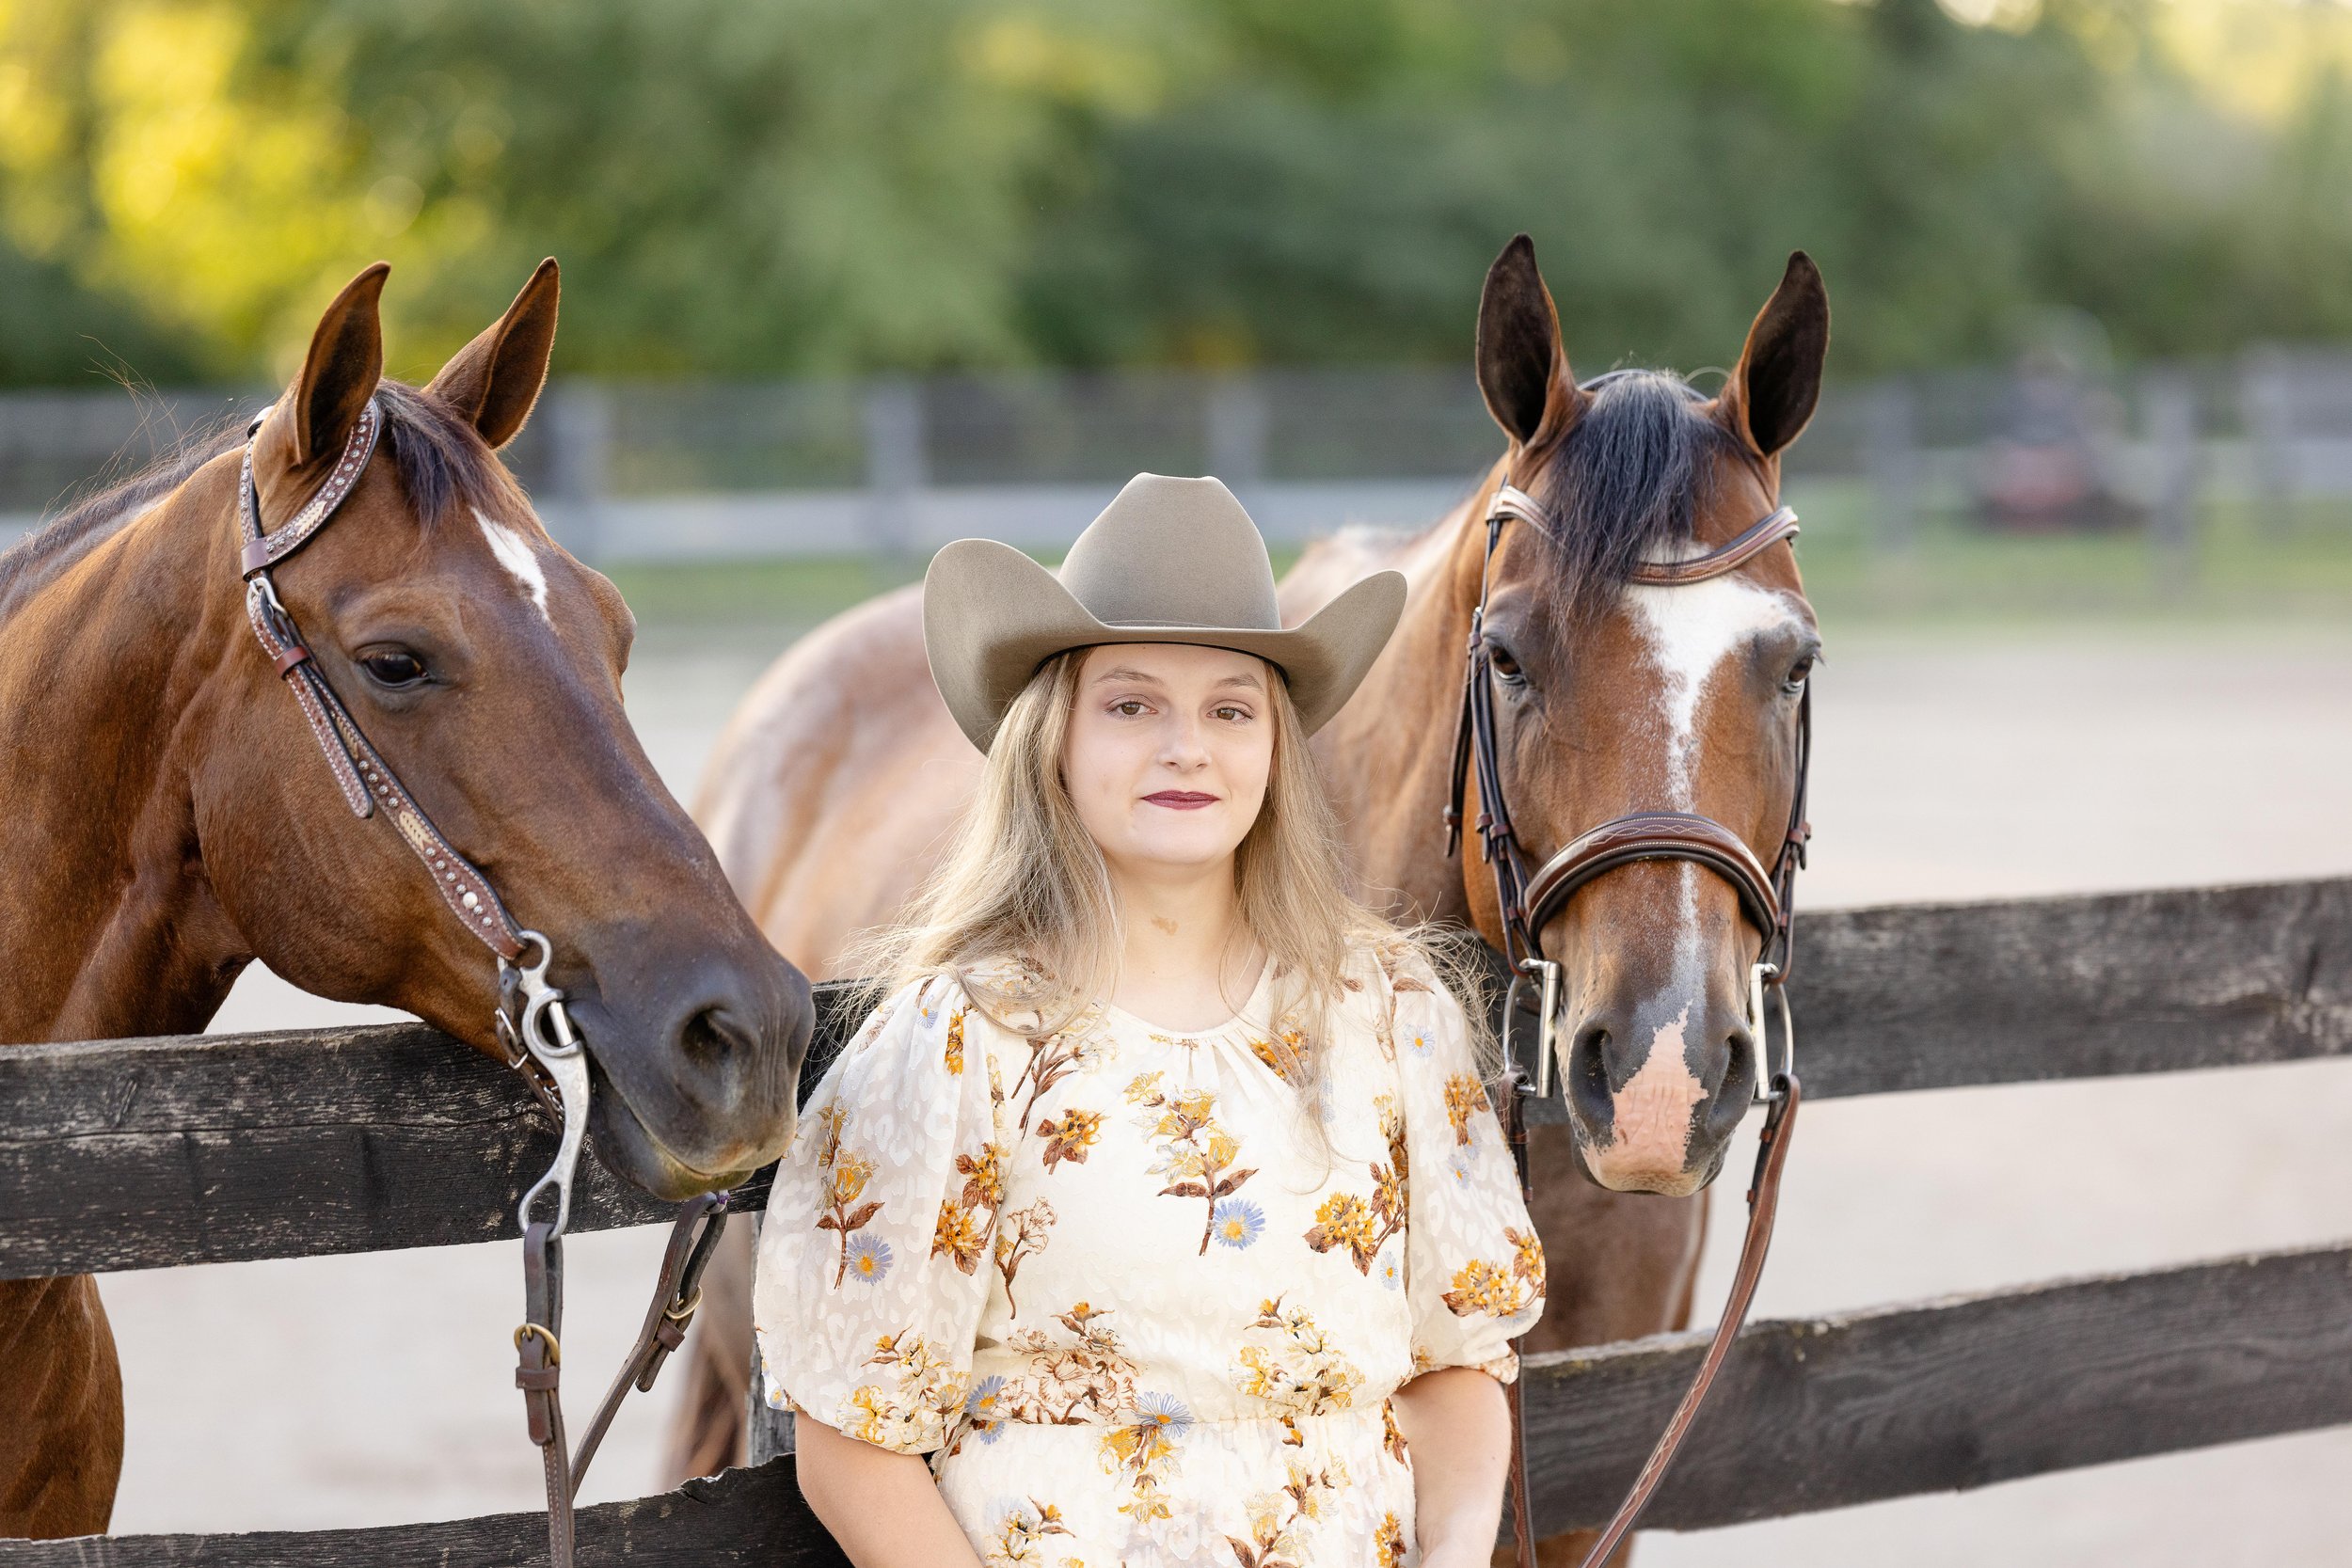 Senior Session with horses in Findlay, OH